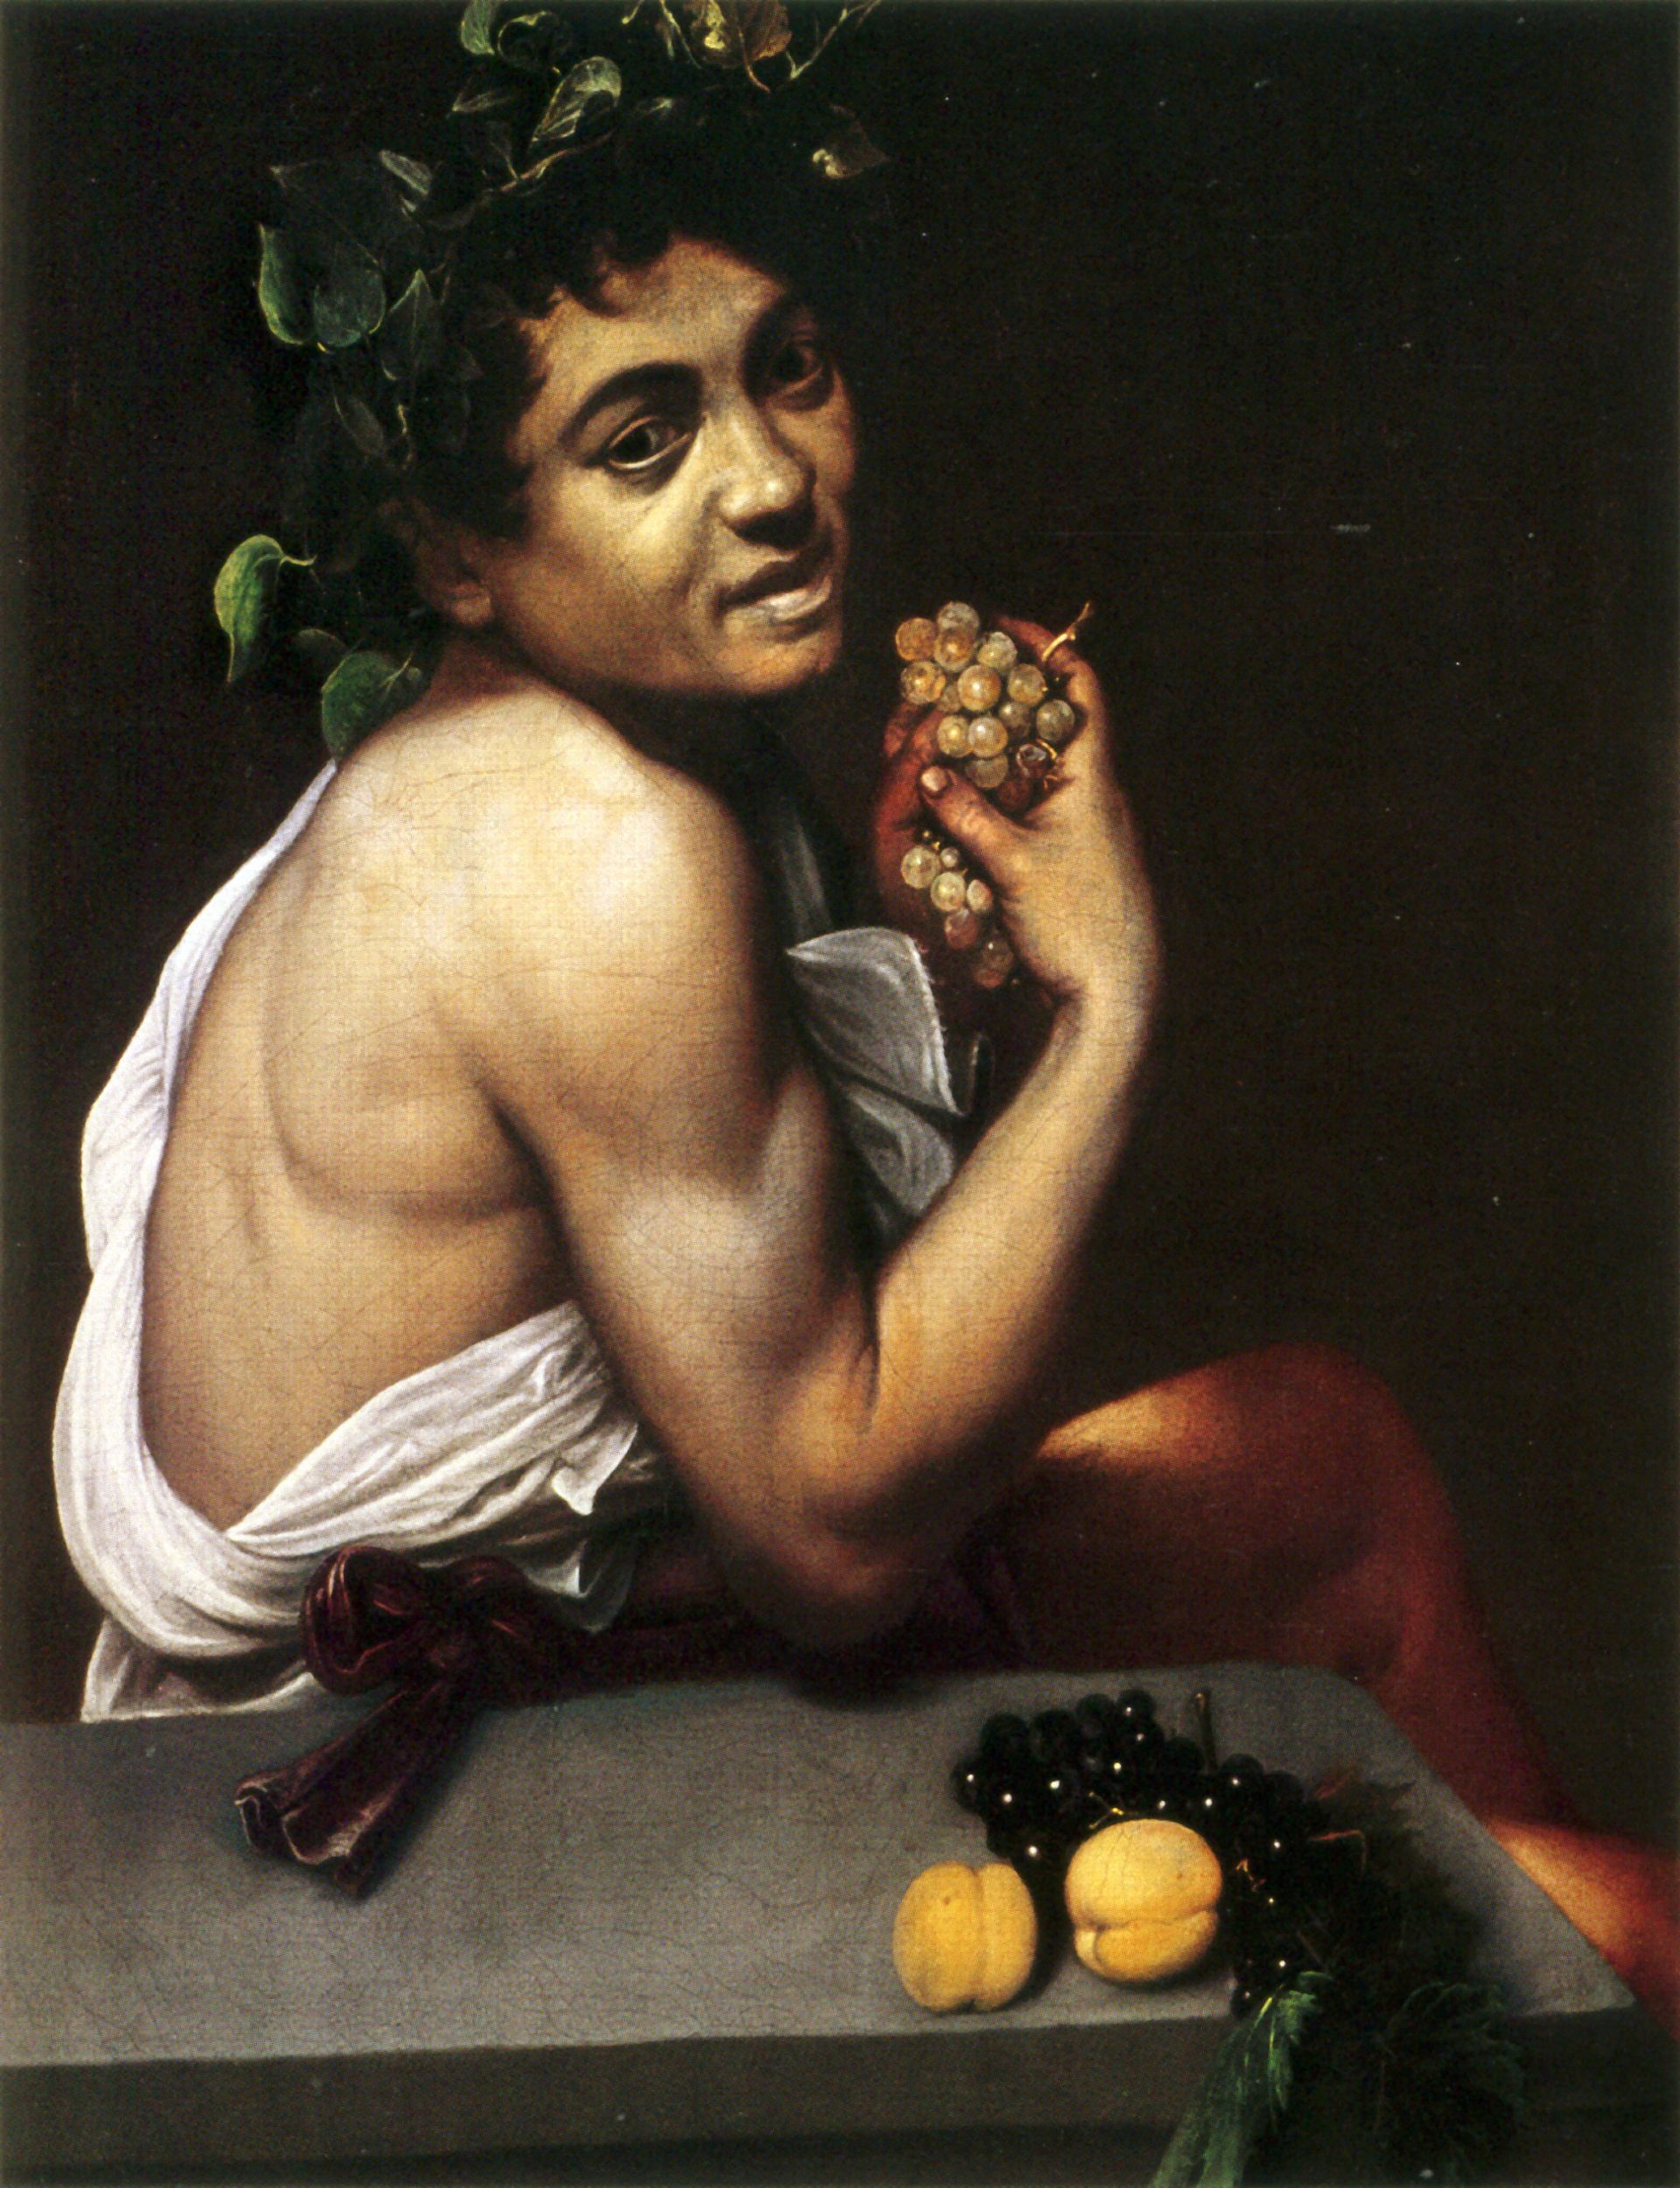 Caravaggio's self-portrait depicts him as the Roman deity Bacchus. He is semi-clothed, with a white robe that exposes his muscular shoulder and arm. The ribbon surrounding his robe rests on a table along with peaches and grapes.